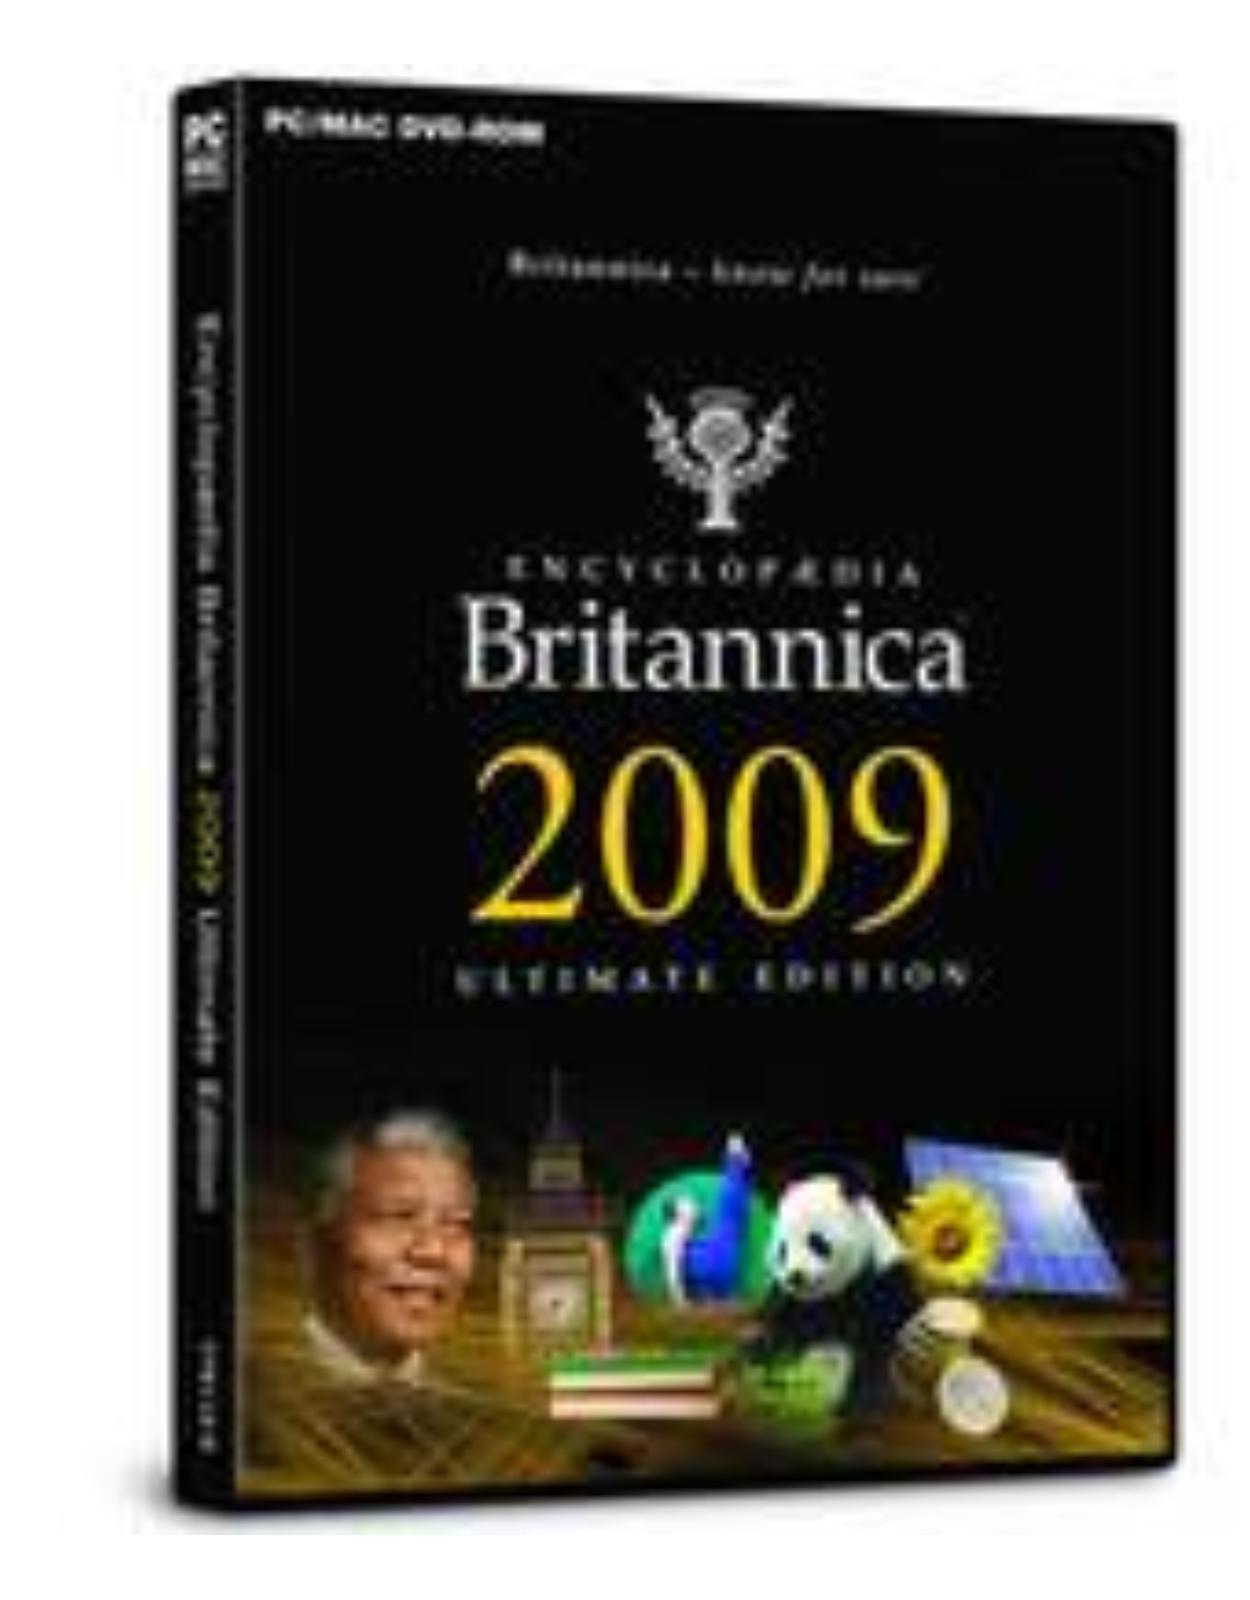 Encyclopaedia Britannica 2009 Ultimate Reference DVD